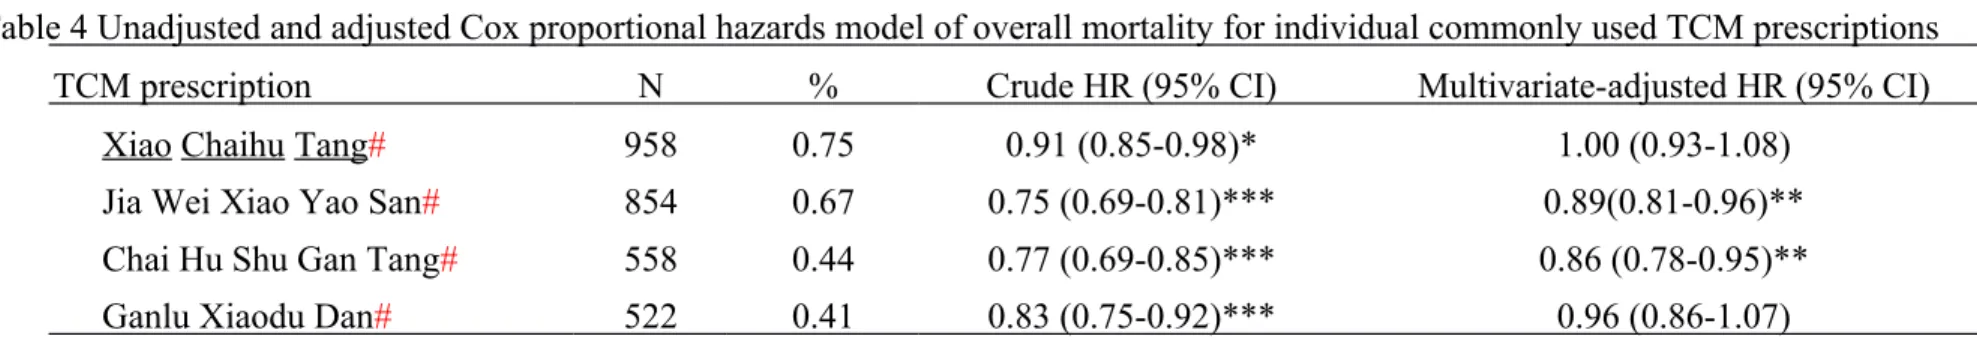 Table 4 Unadjusted and adjusted Cox proportional hazards model of overall mortality for individual commonly used TCM prescriptions